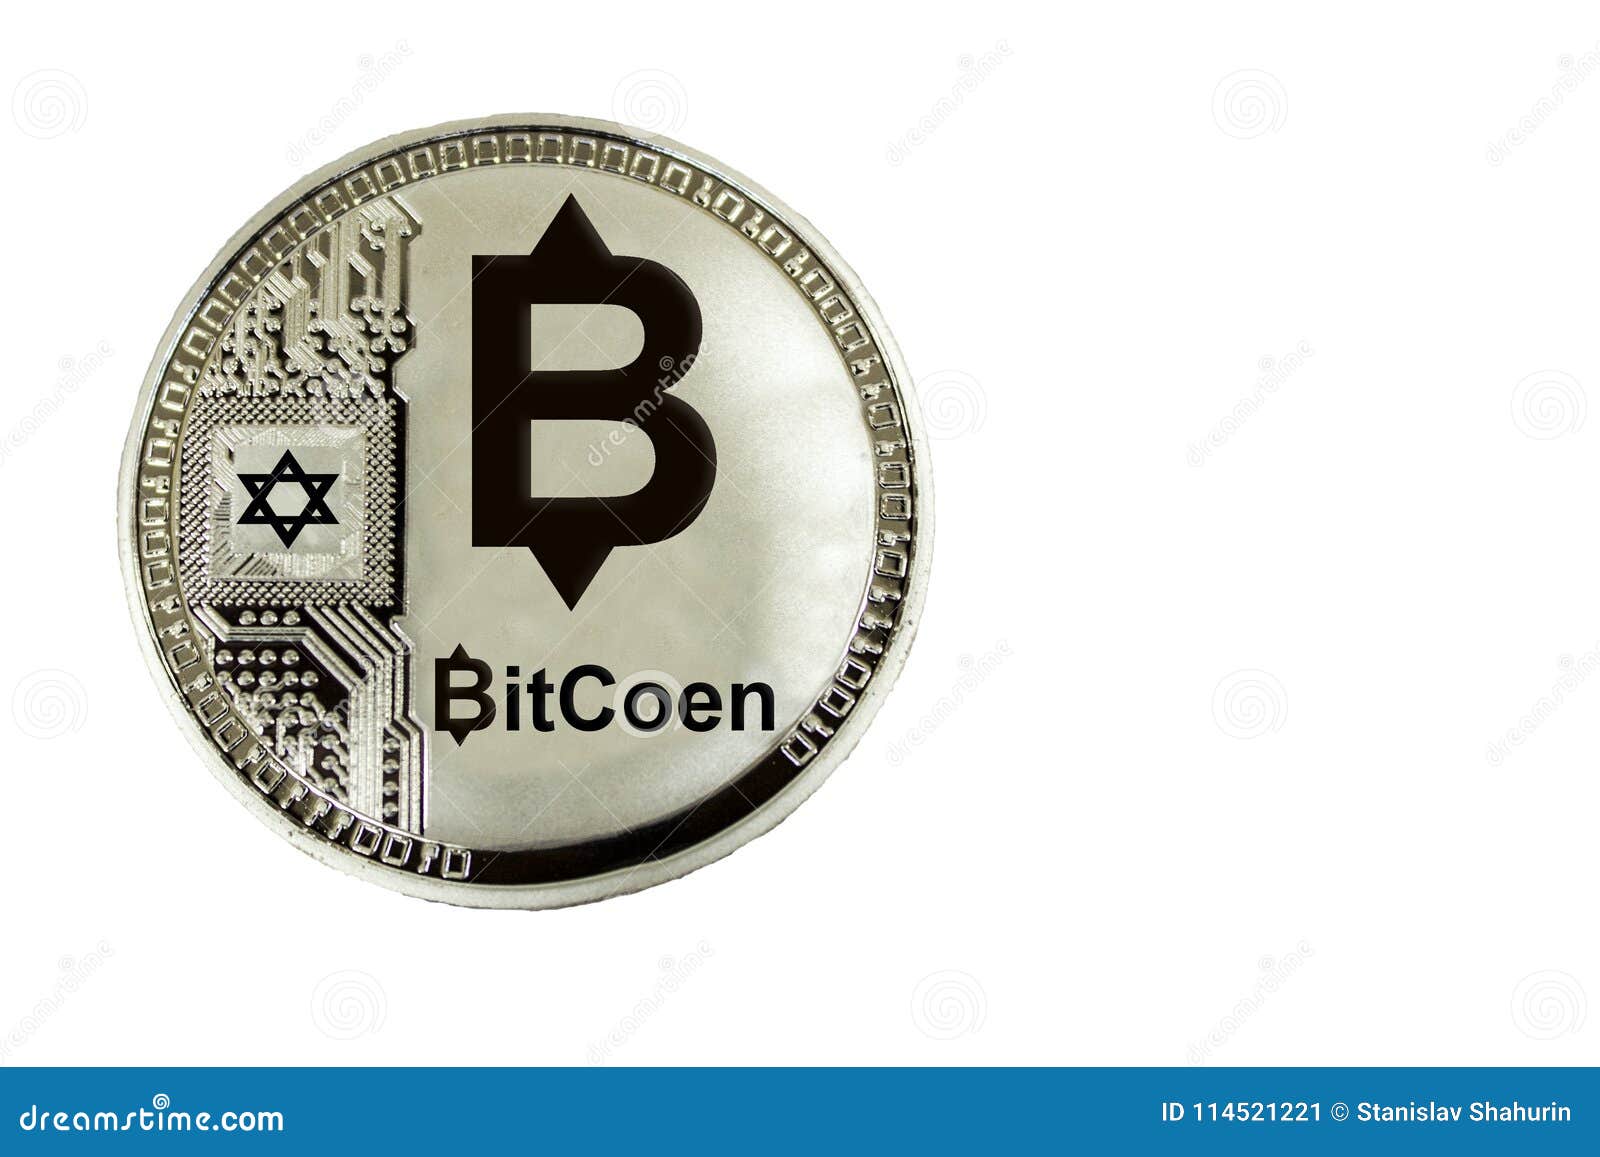 cryptocurrency from isreal